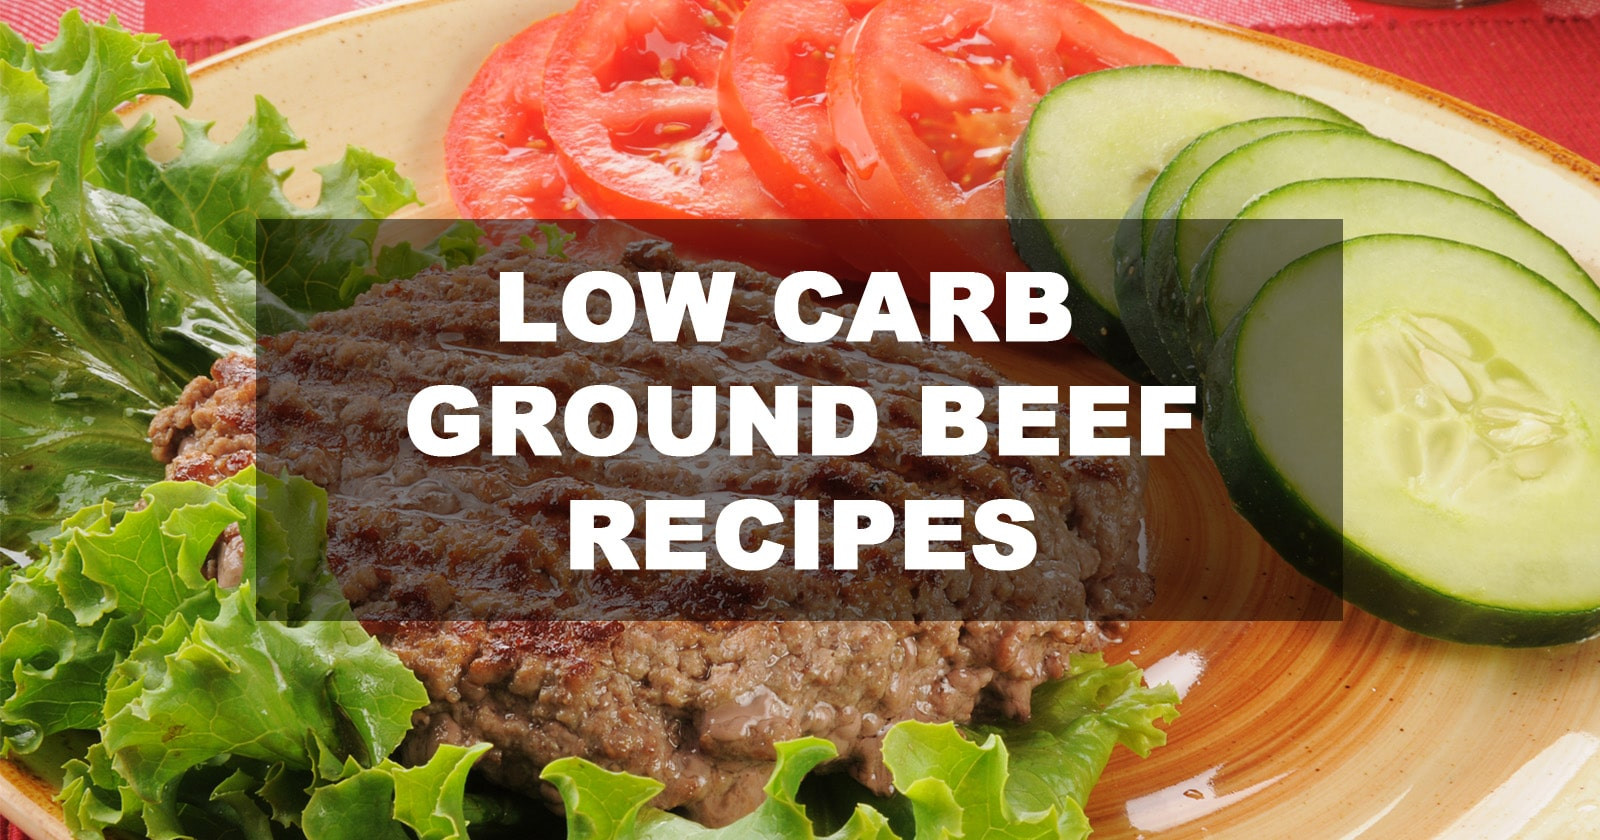 Low Carb Beef Recipes
 Best Low Carb Ground Beef Recipes October 2018